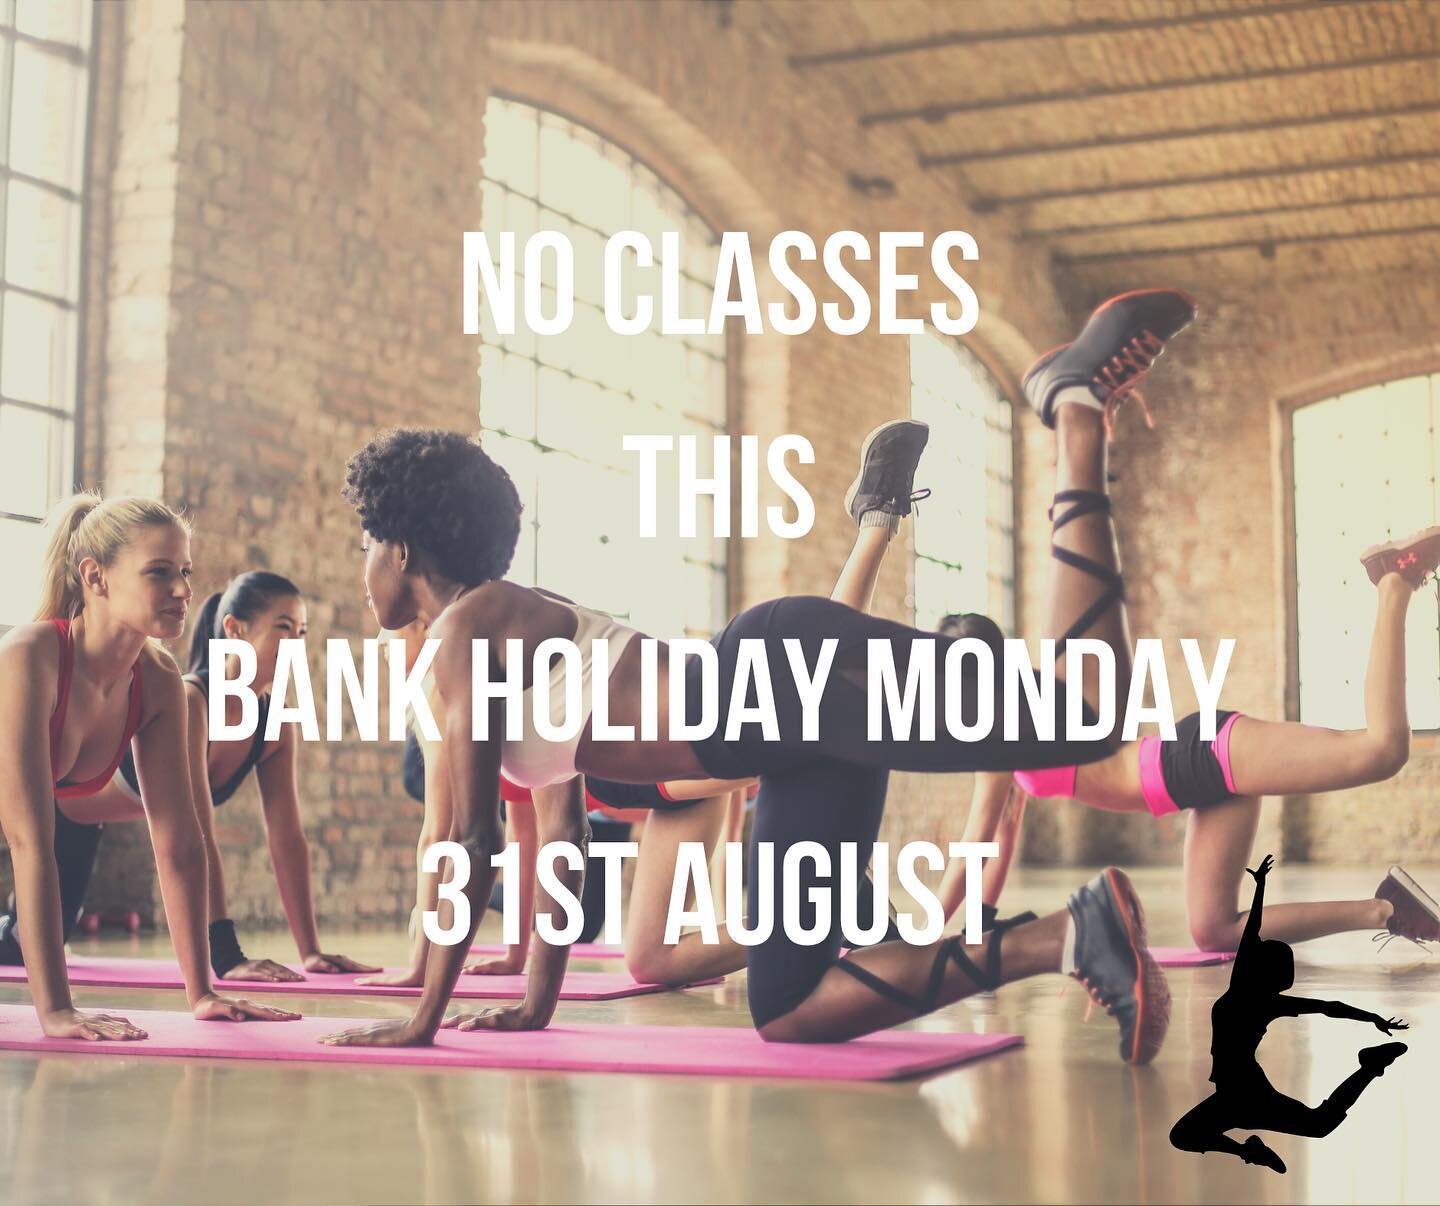 Thank you for a wonderful week of classes...you were all fab! 👍🏻

We have no classes this bank holiday Monday 31st August! 
Enjoy your long weekend and I will see you all back online for Tuesday - Zumba 6.30pm 💃🏼